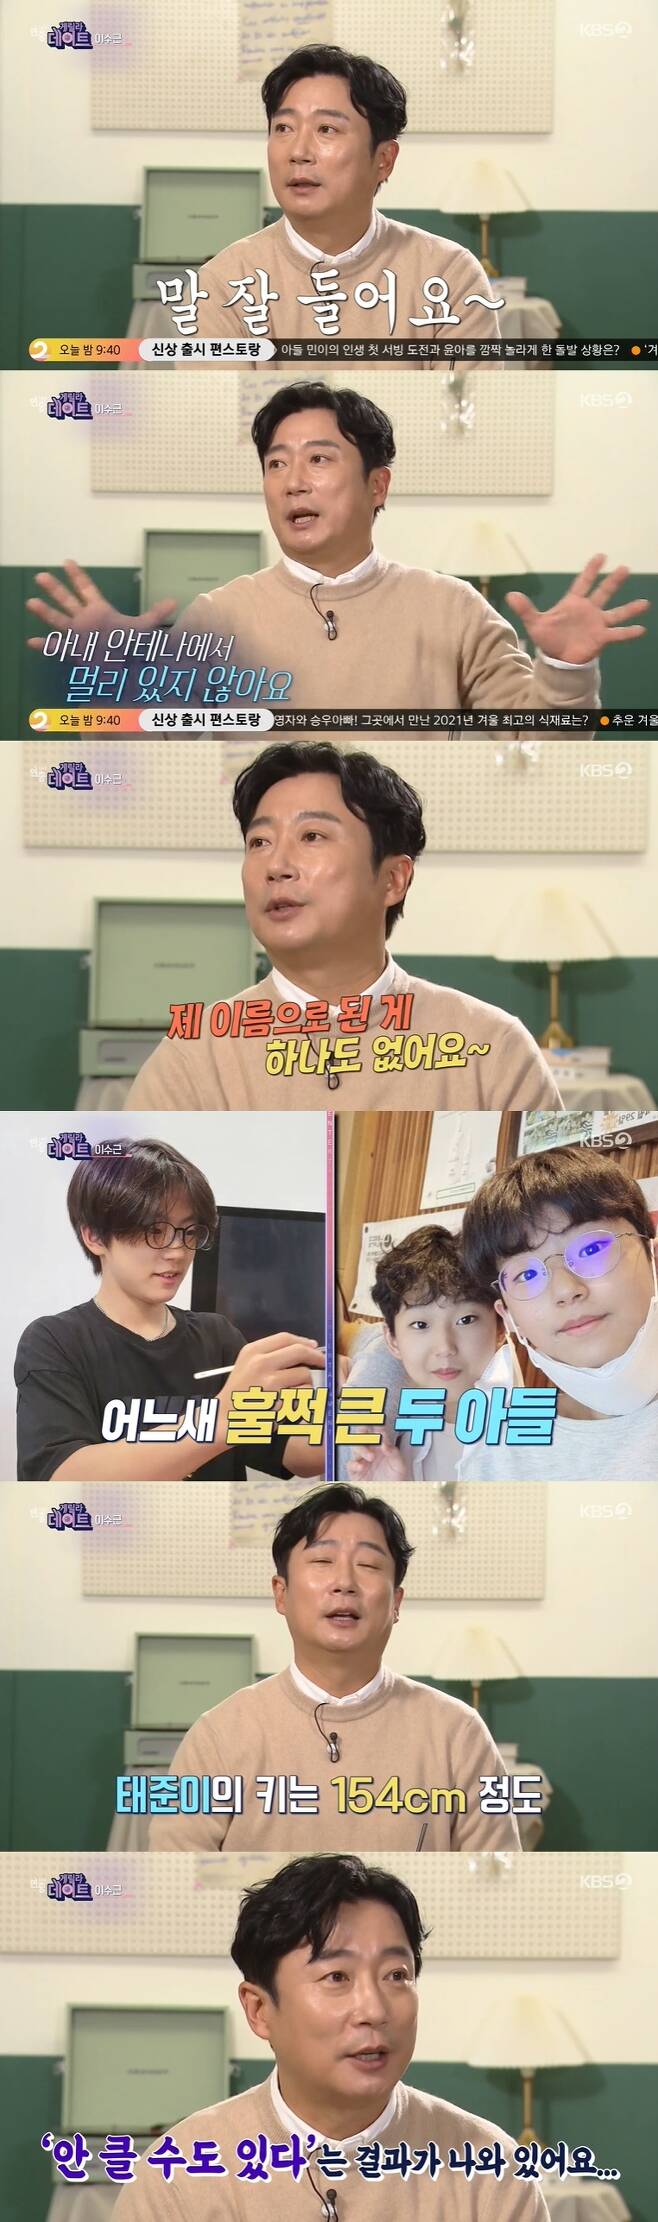 Lee Soo-geun revealed his love for his wife, Choi Soo-jong.Lee Soo-geun appeared as a guerrilla dating guest on KBS 2TVs Entertainment Weekly Live, which was broadcast on December 10.Lee Soo-geun said, As you know a lot, my wife is not in good shape.I am worried and I call so much.Then, I say, What do you do so? My heart needs to talk to me. My wife is in bad shape, but I always want to cook rice.Lee Soo-geun said, I listen to my wife with the secret of being loved. Lee Soo-geun said, If my wife calls, I go right in.Im not far from my wifes antenna, and Im almost always in the dogs bowel pads when Im ground and the dishes are stacked. My wifes not a good organizer, he said.God doesnt give it all. I cant see my hair fall. I do all that.Lee Soo-geun also revealed the economic rights: Nothing is in my name. Its all my wifes. The installments are all in my name.We have to do well, he said.Lee Soo-geun also mentioned the big kids.Lee Soo-geun said, I went to one of the oriental medicine yesterday because I was too tall.Friends came home to play, but he is 178 to 180 centimeters tall. Taejun is about 154 centimeters, so he was surprised.He wants to see if the growth plate is open.